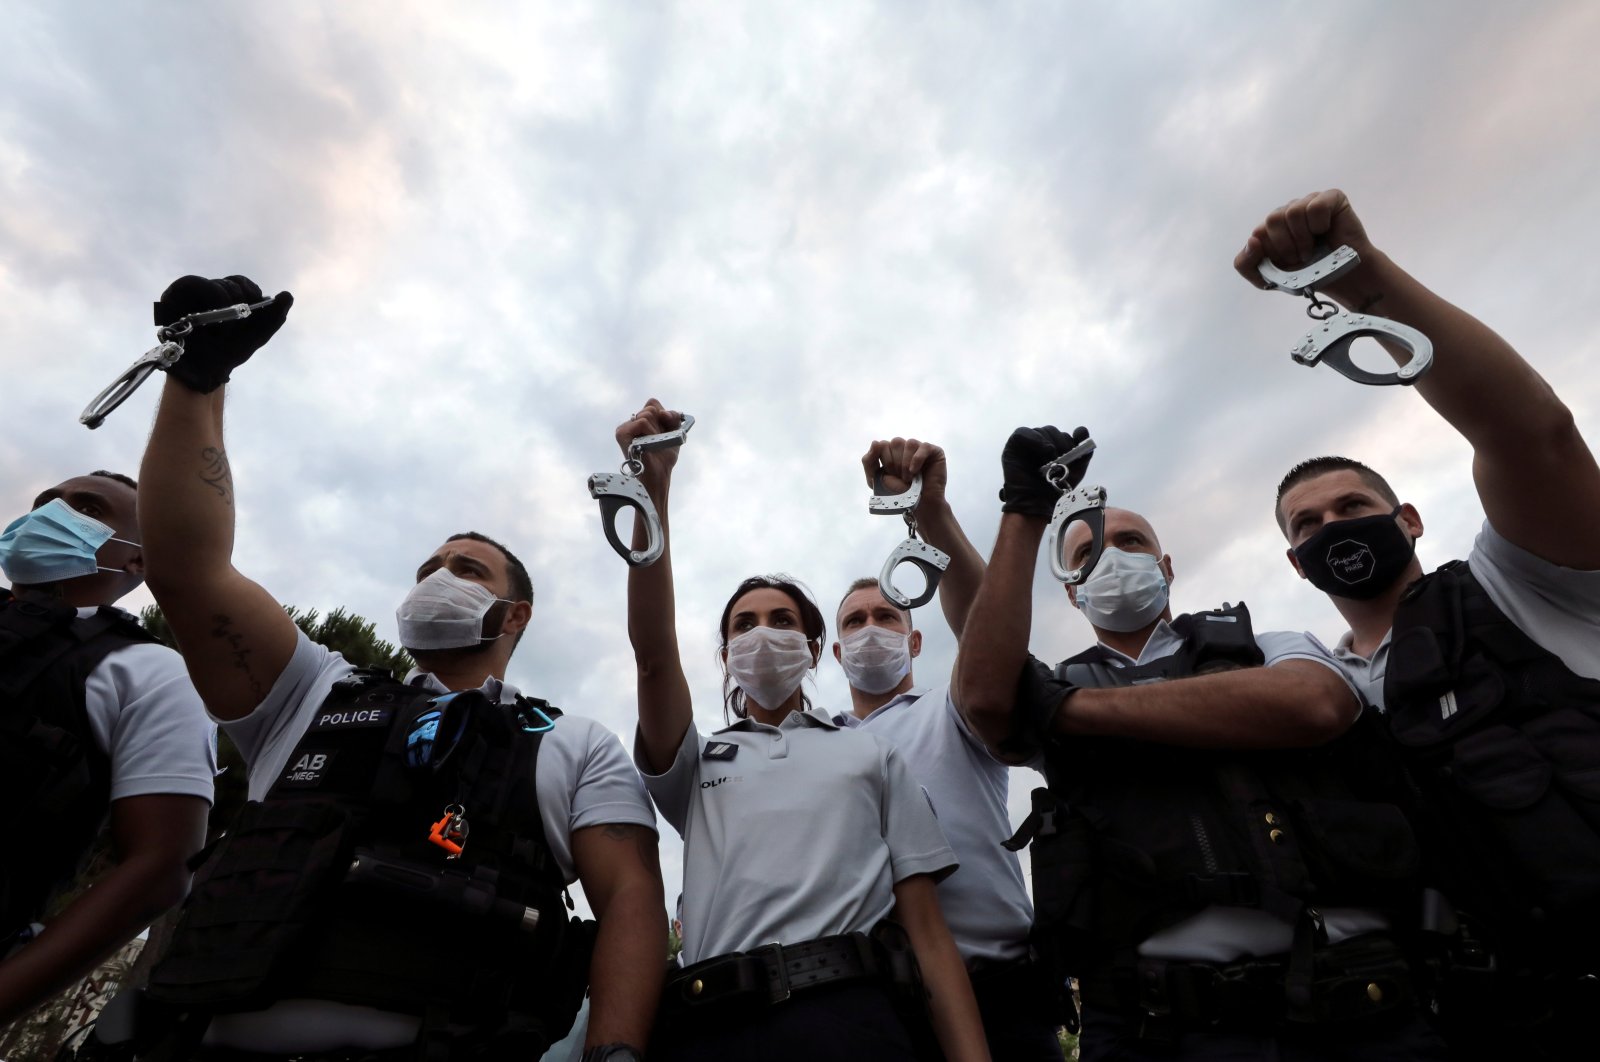 Police officers hold handcuffs in the air during a protest against French Interior Minister Christophe Castaner's reforms, including ditching a controversial chokehold method of arrest, Nice, France June 12, 2020. (Reuters Photo)